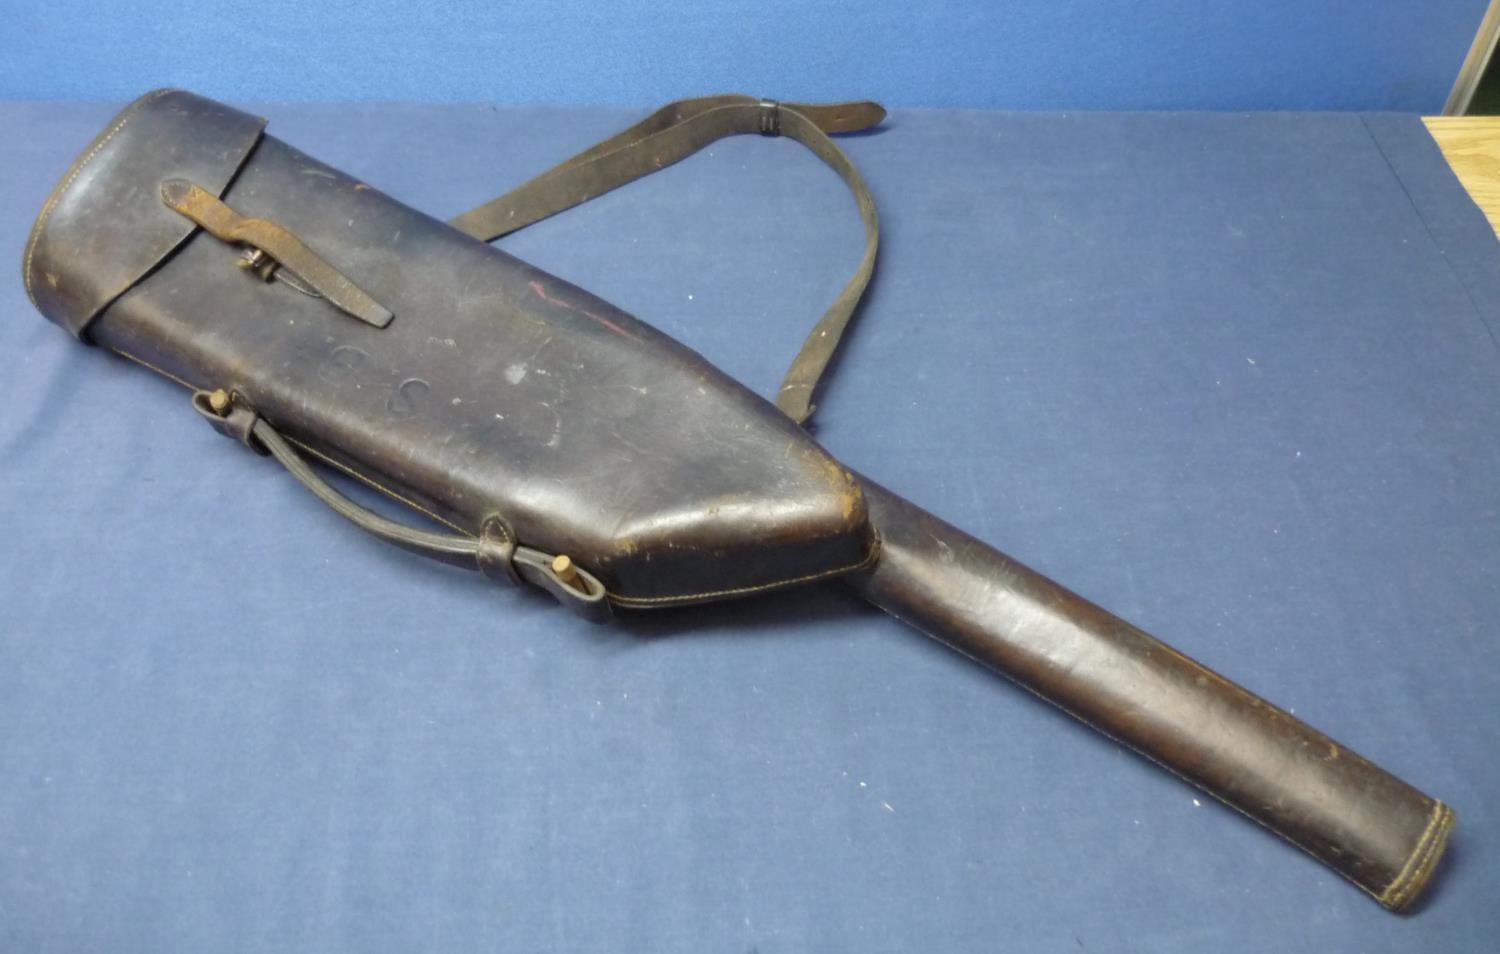 Unusual vintage leather Leg-of-Mutton style gun case with extended barrel section